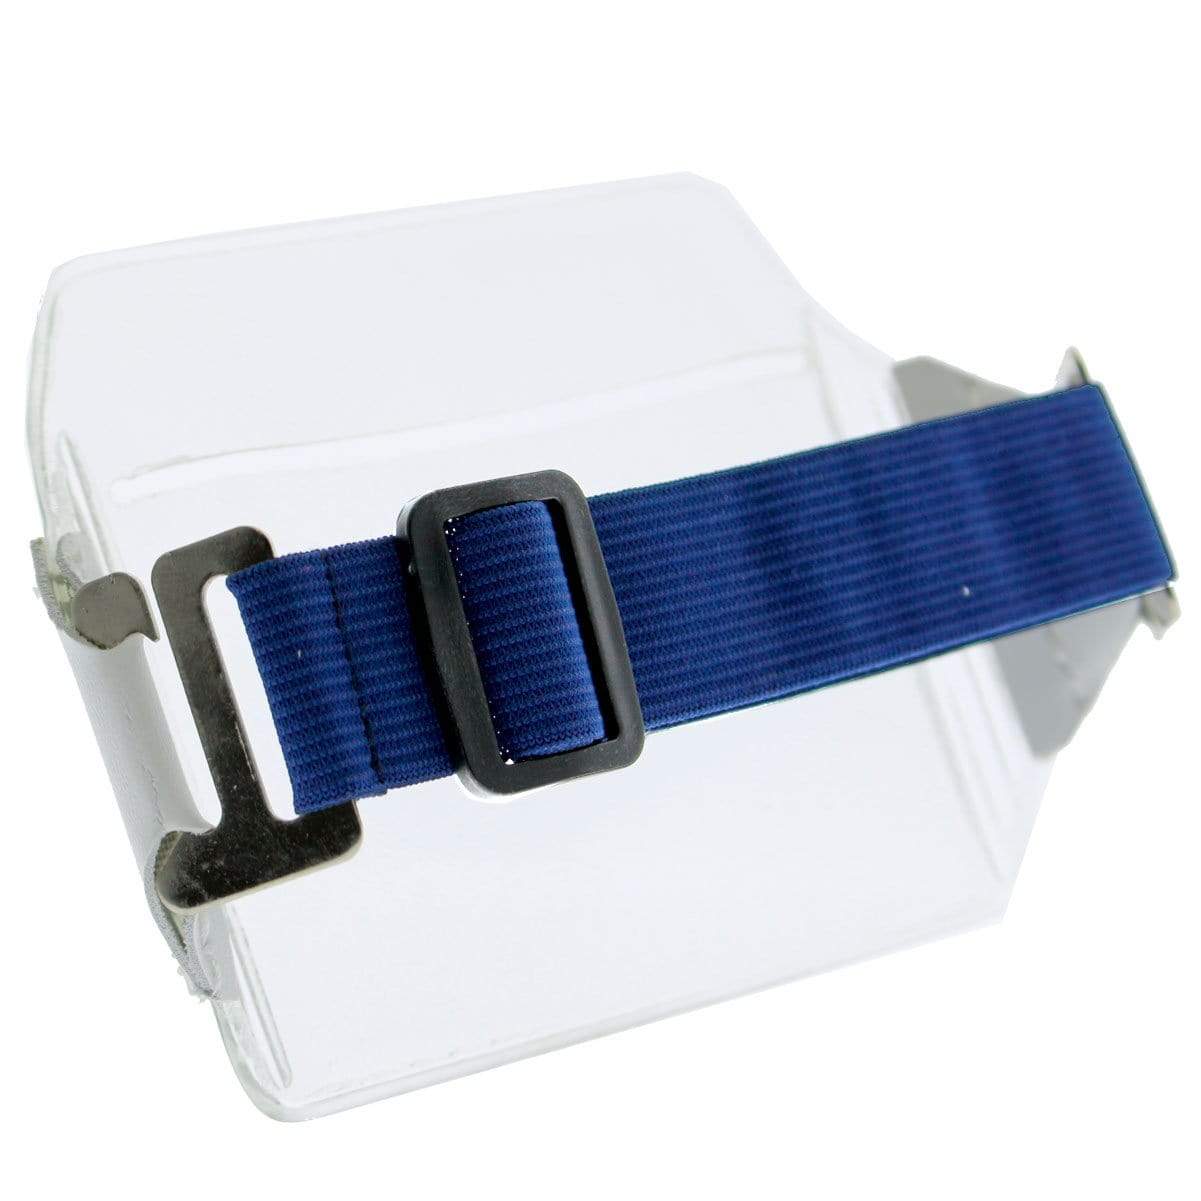 A Clear Over Size Vinyl Horizontal Arm Band Badge Holder (P/N 1840-7100) is displayed on a transparent stand, reminiscent of an armband badge holder.